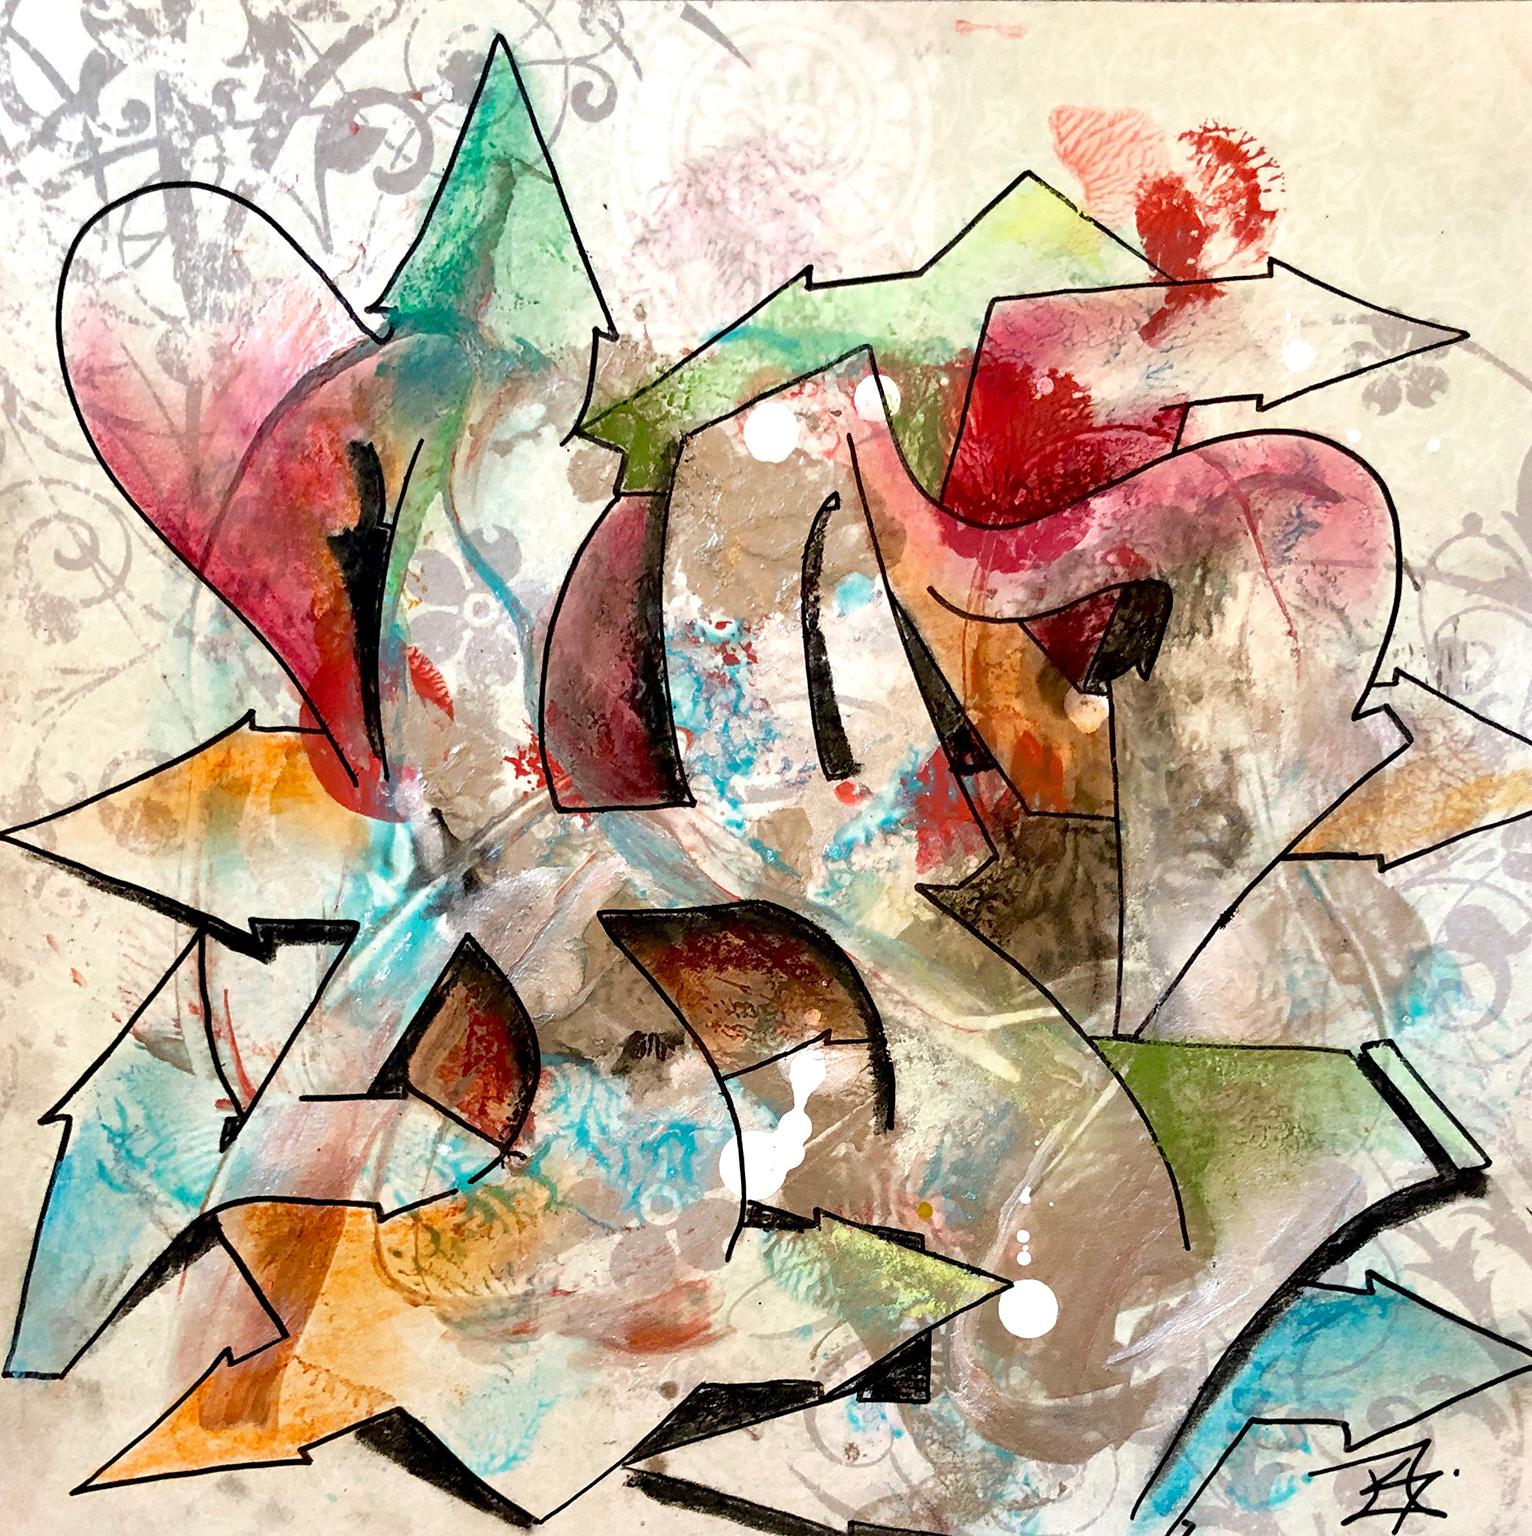 Kelography Letters (Graffiti "H" Urban Graphic) / Limited ed. 25  - Mixed Media Art by Kel1st